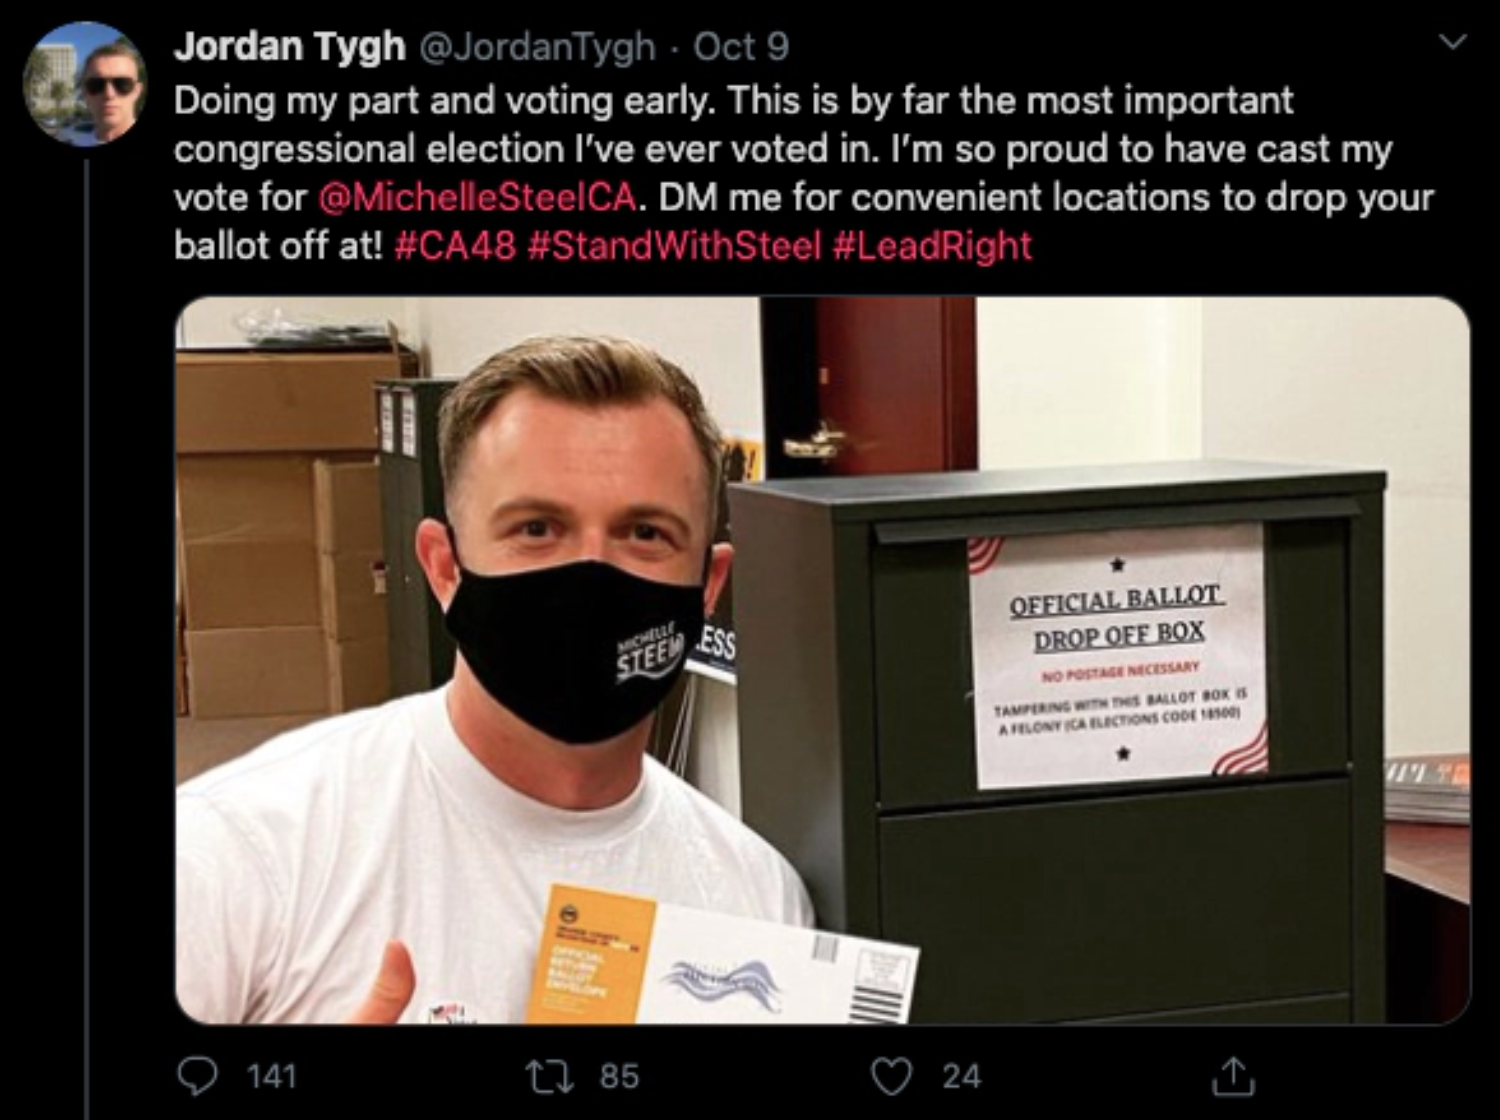 GOP field director Jordan Tygh kneeling in front of a fake ballot box in an image posted to Twitter.